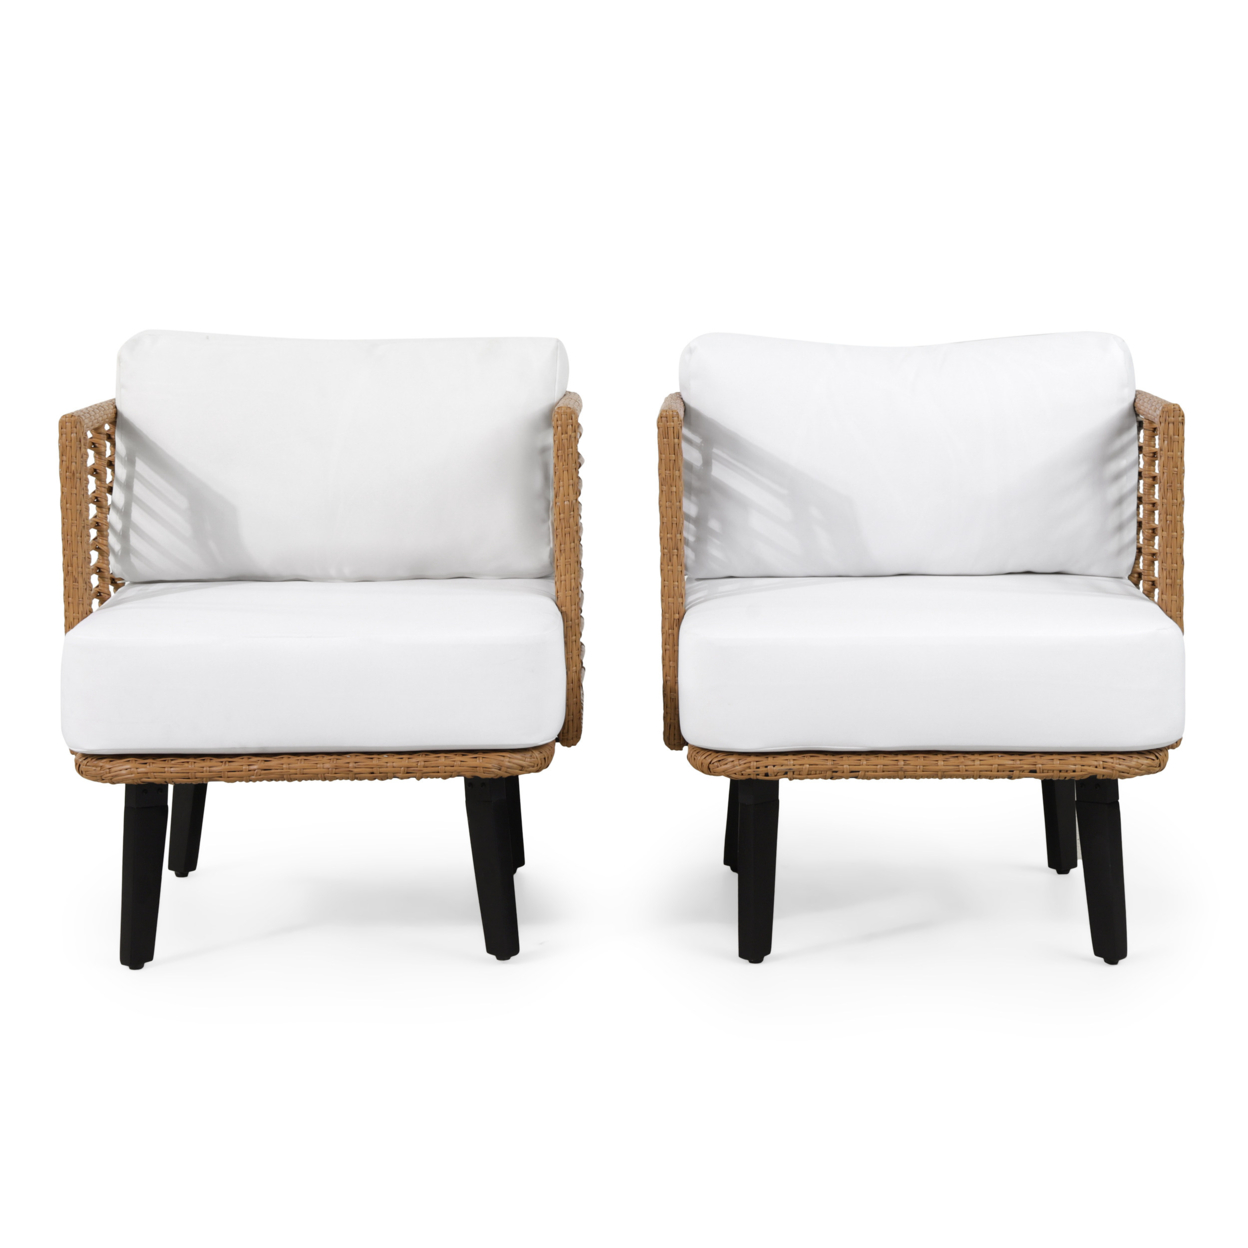 Rauser Outdoor Wicker Club Chair With Water Resistant Cushion, Set Of 2, Light Brown And White